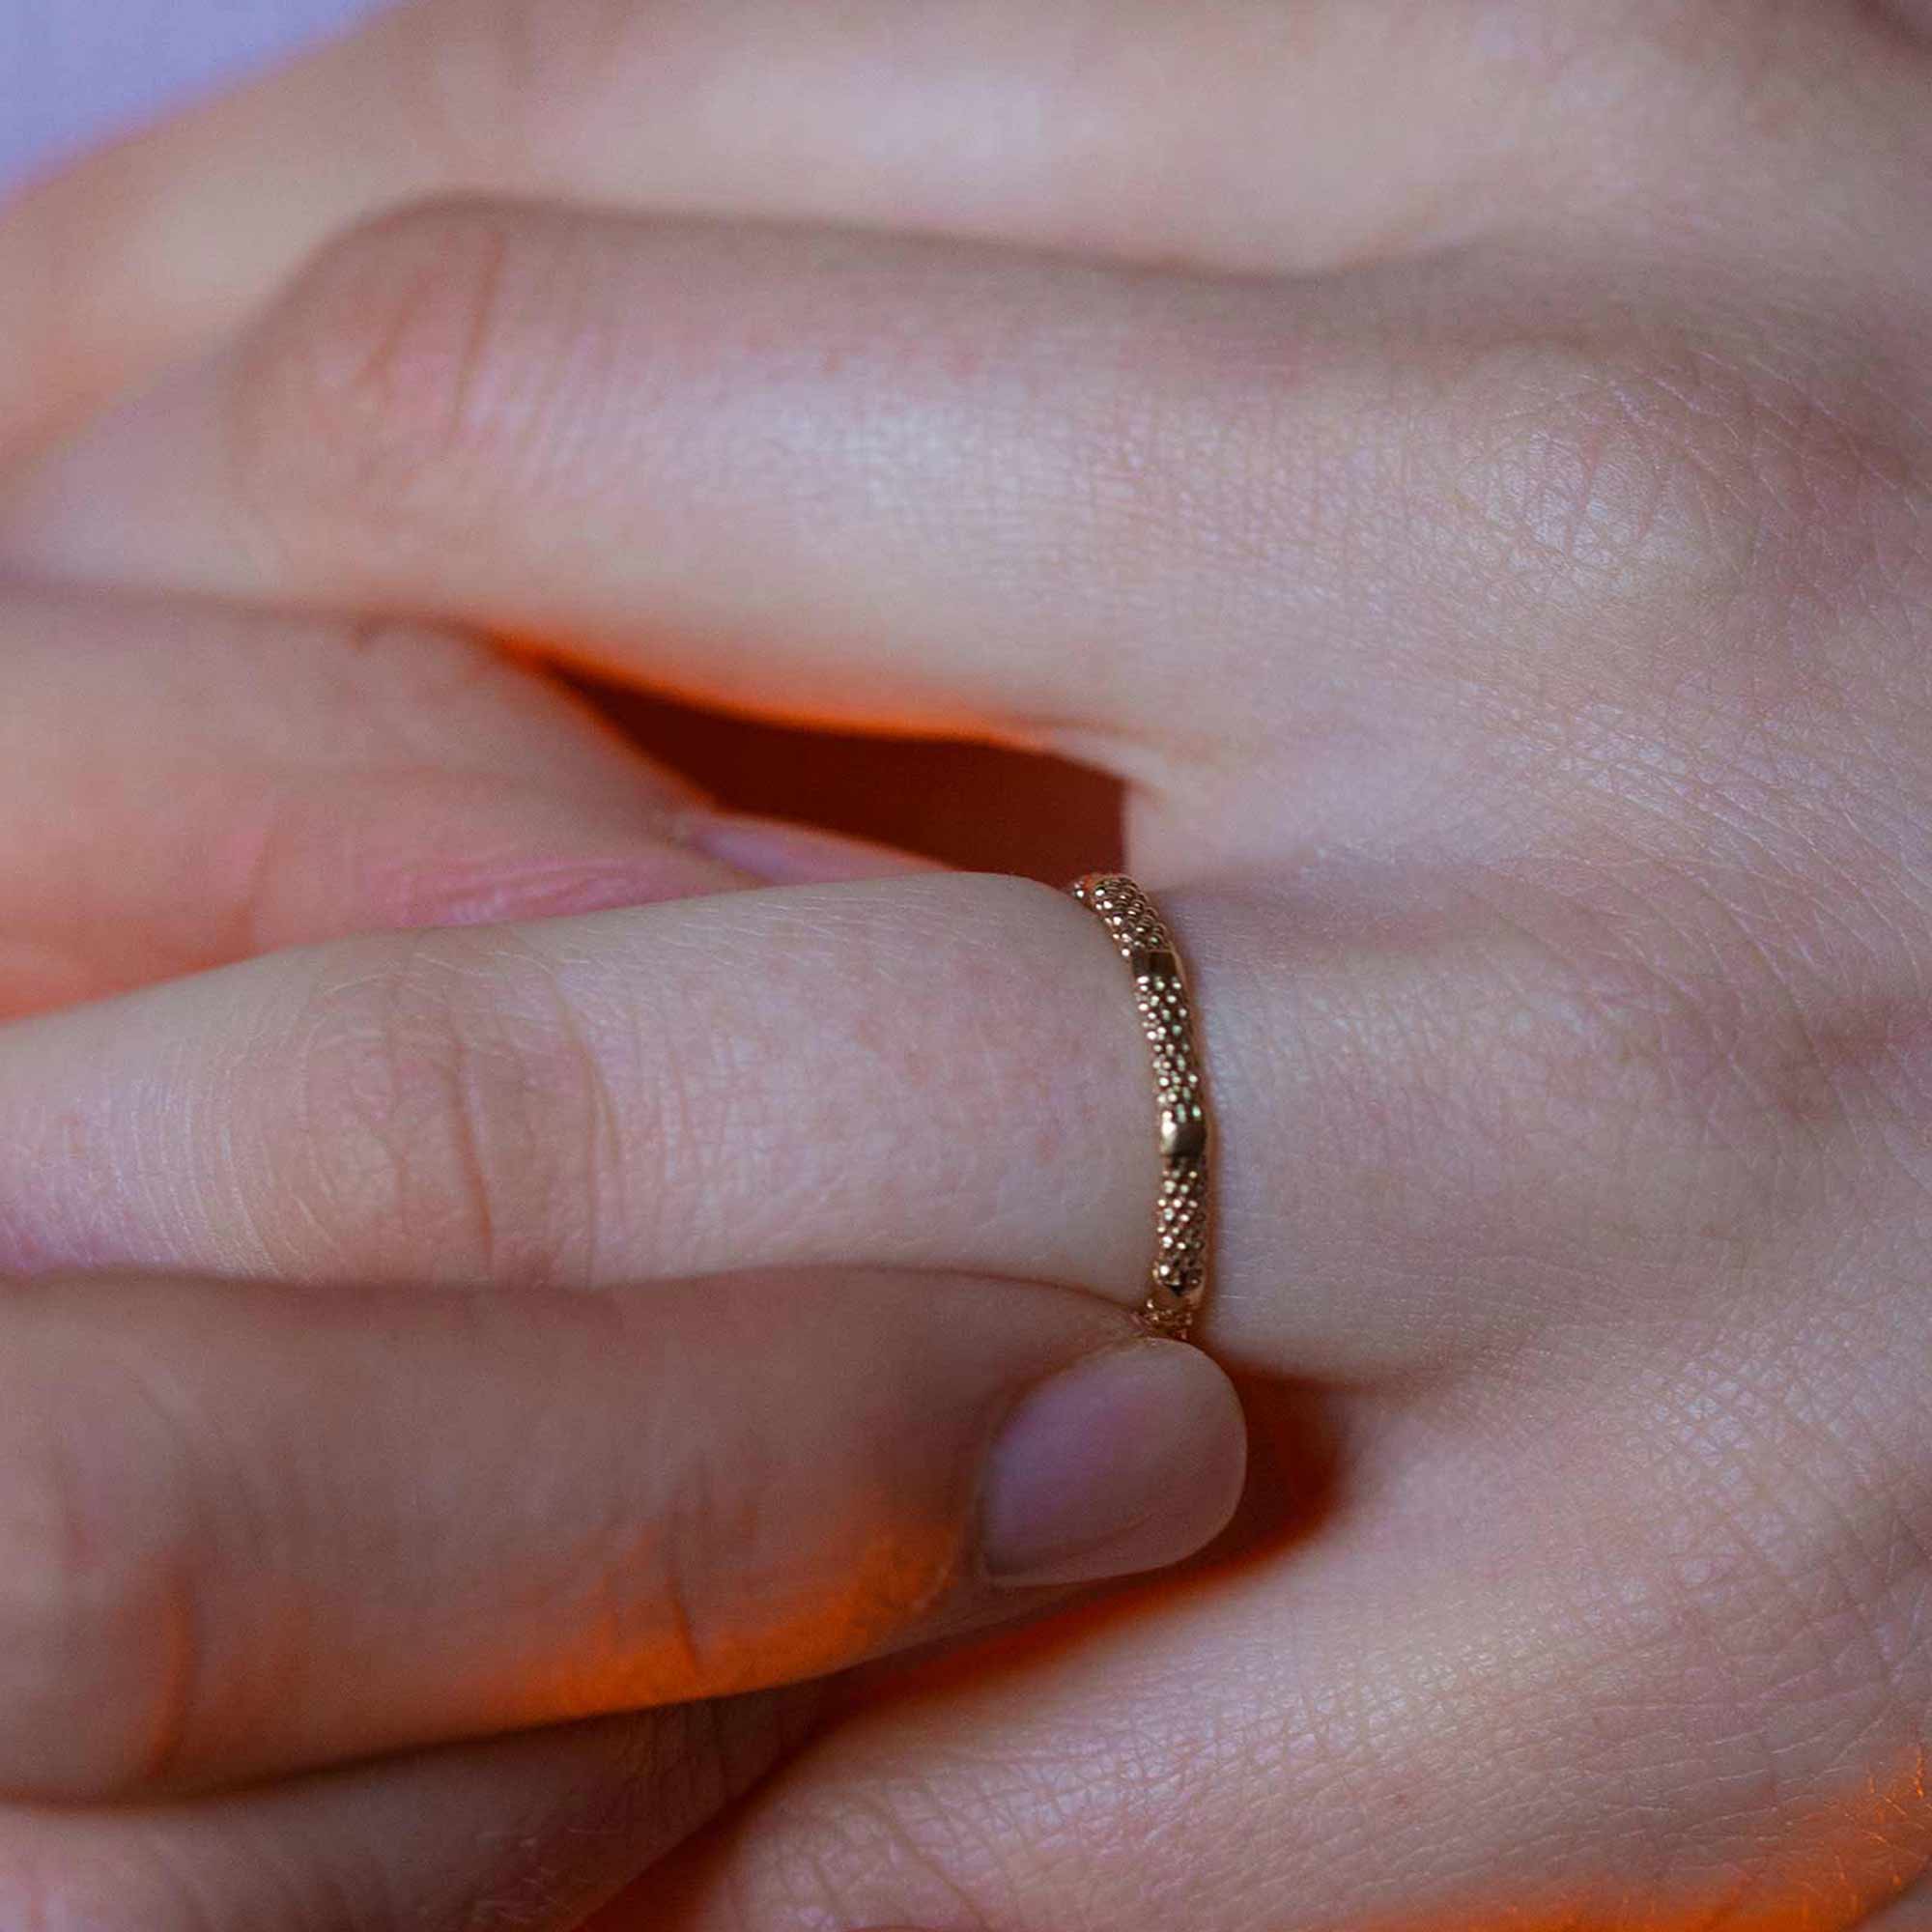 A slim rose gold stripy textured wedding ring is worn on models hand